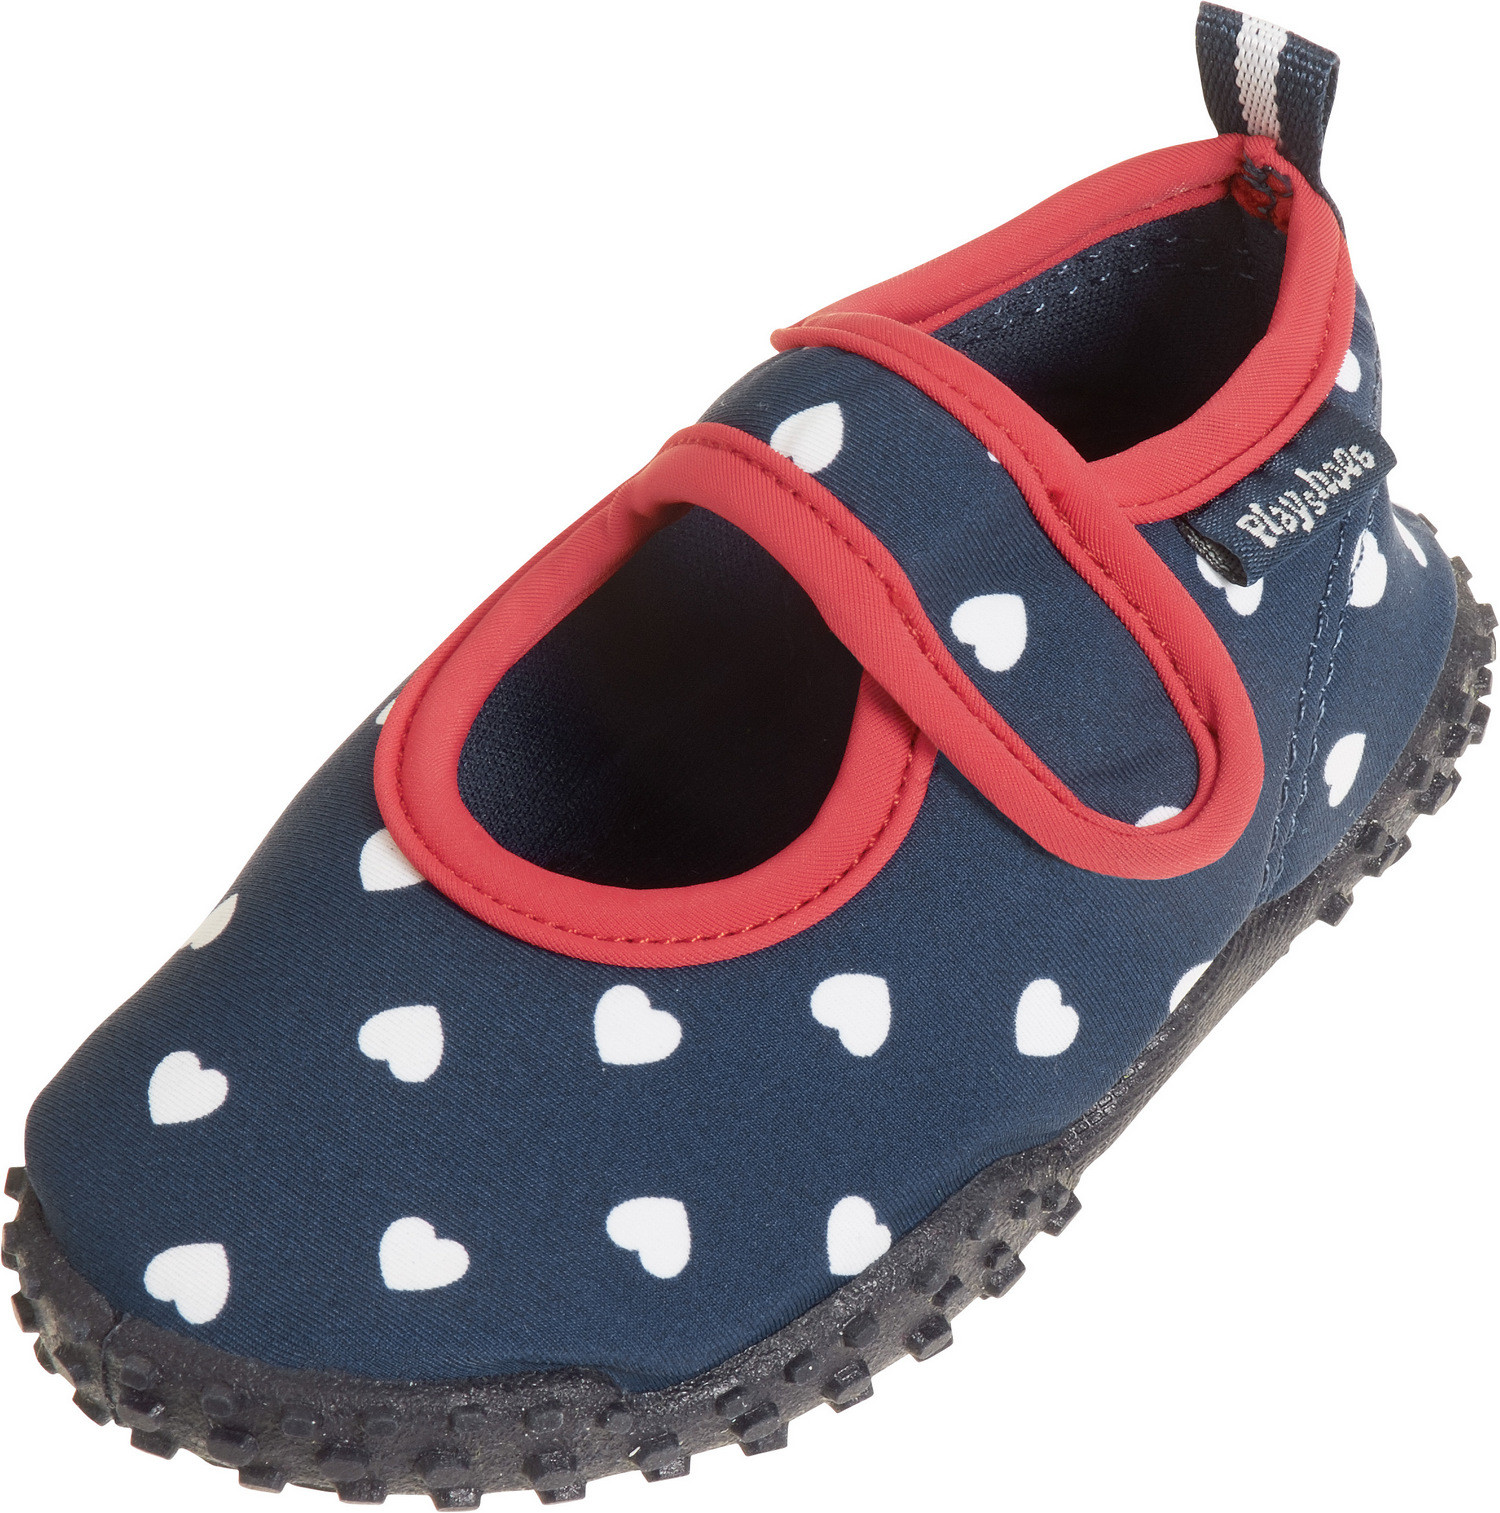 Playshoes - UV water shoes for girls - hearts - dark blue